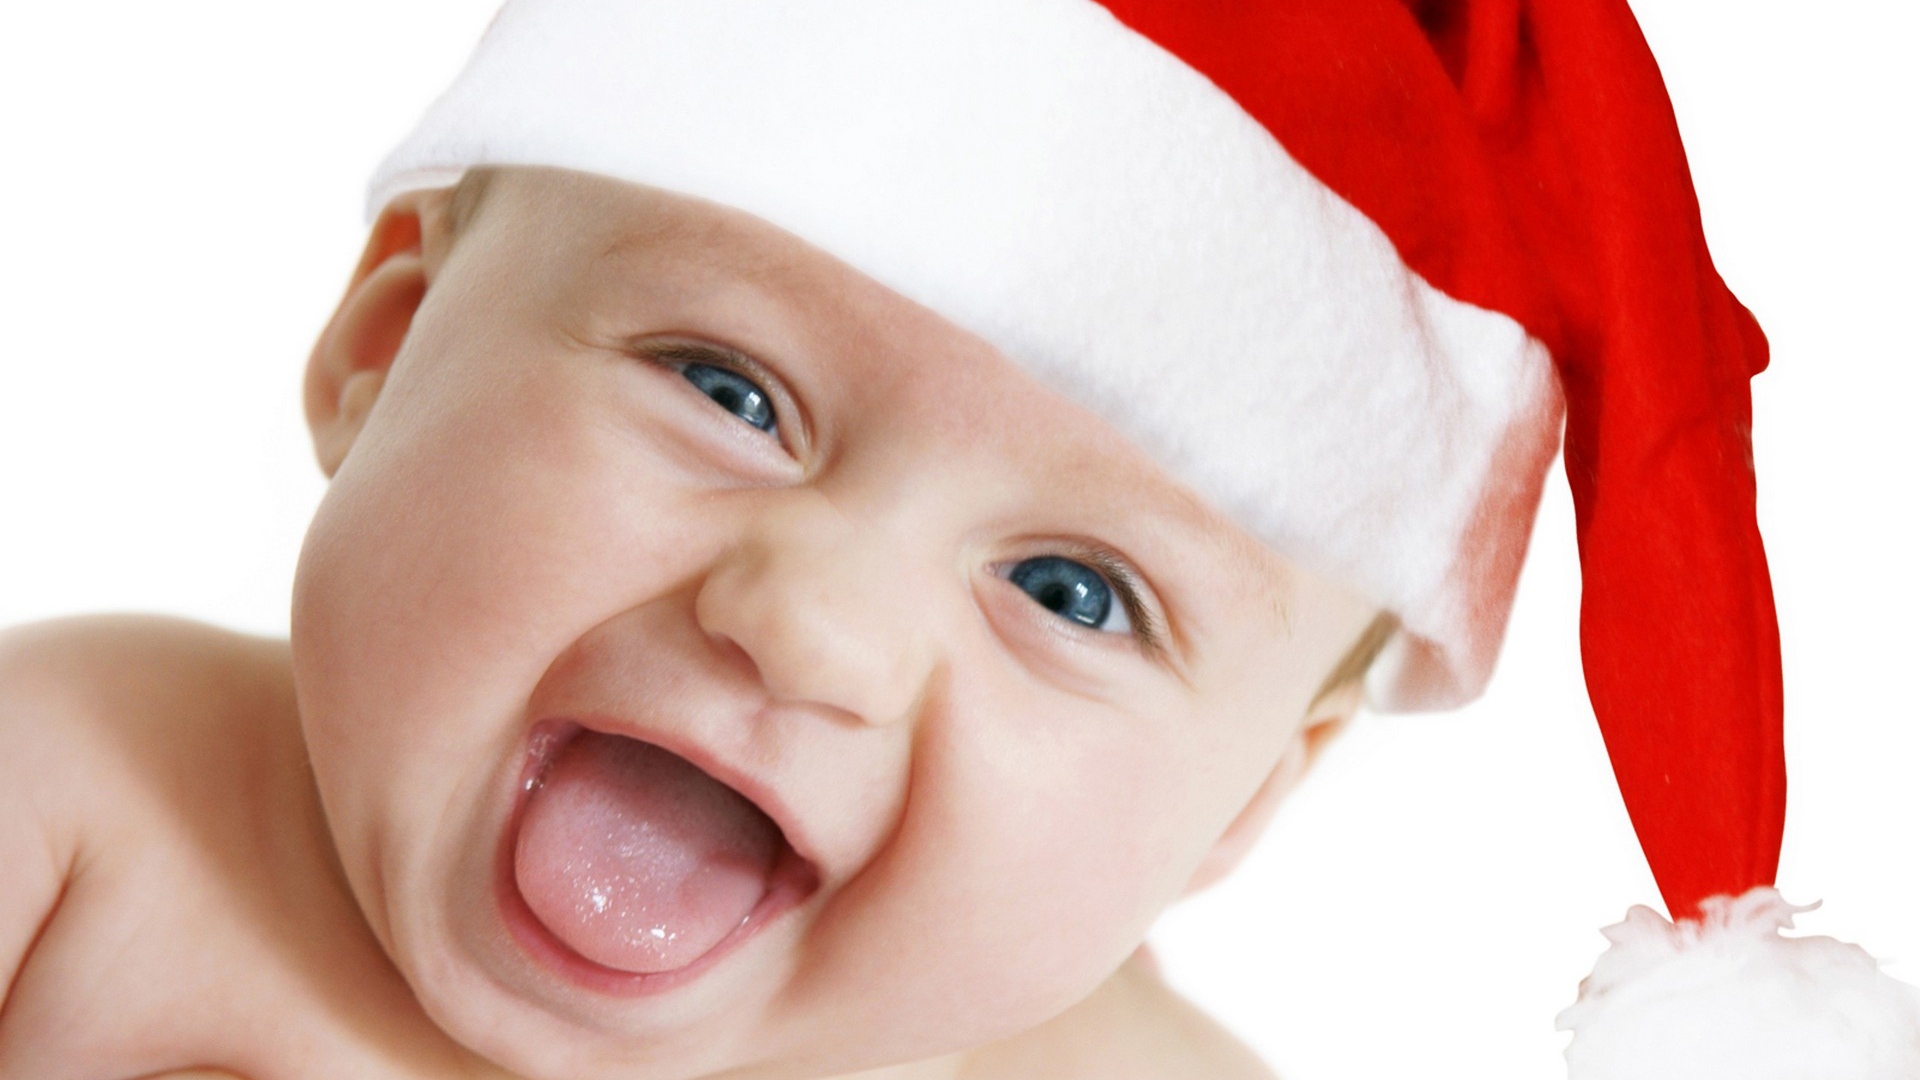 baby hd wallpapers 1080p,child,face,skin,nose,facial expression